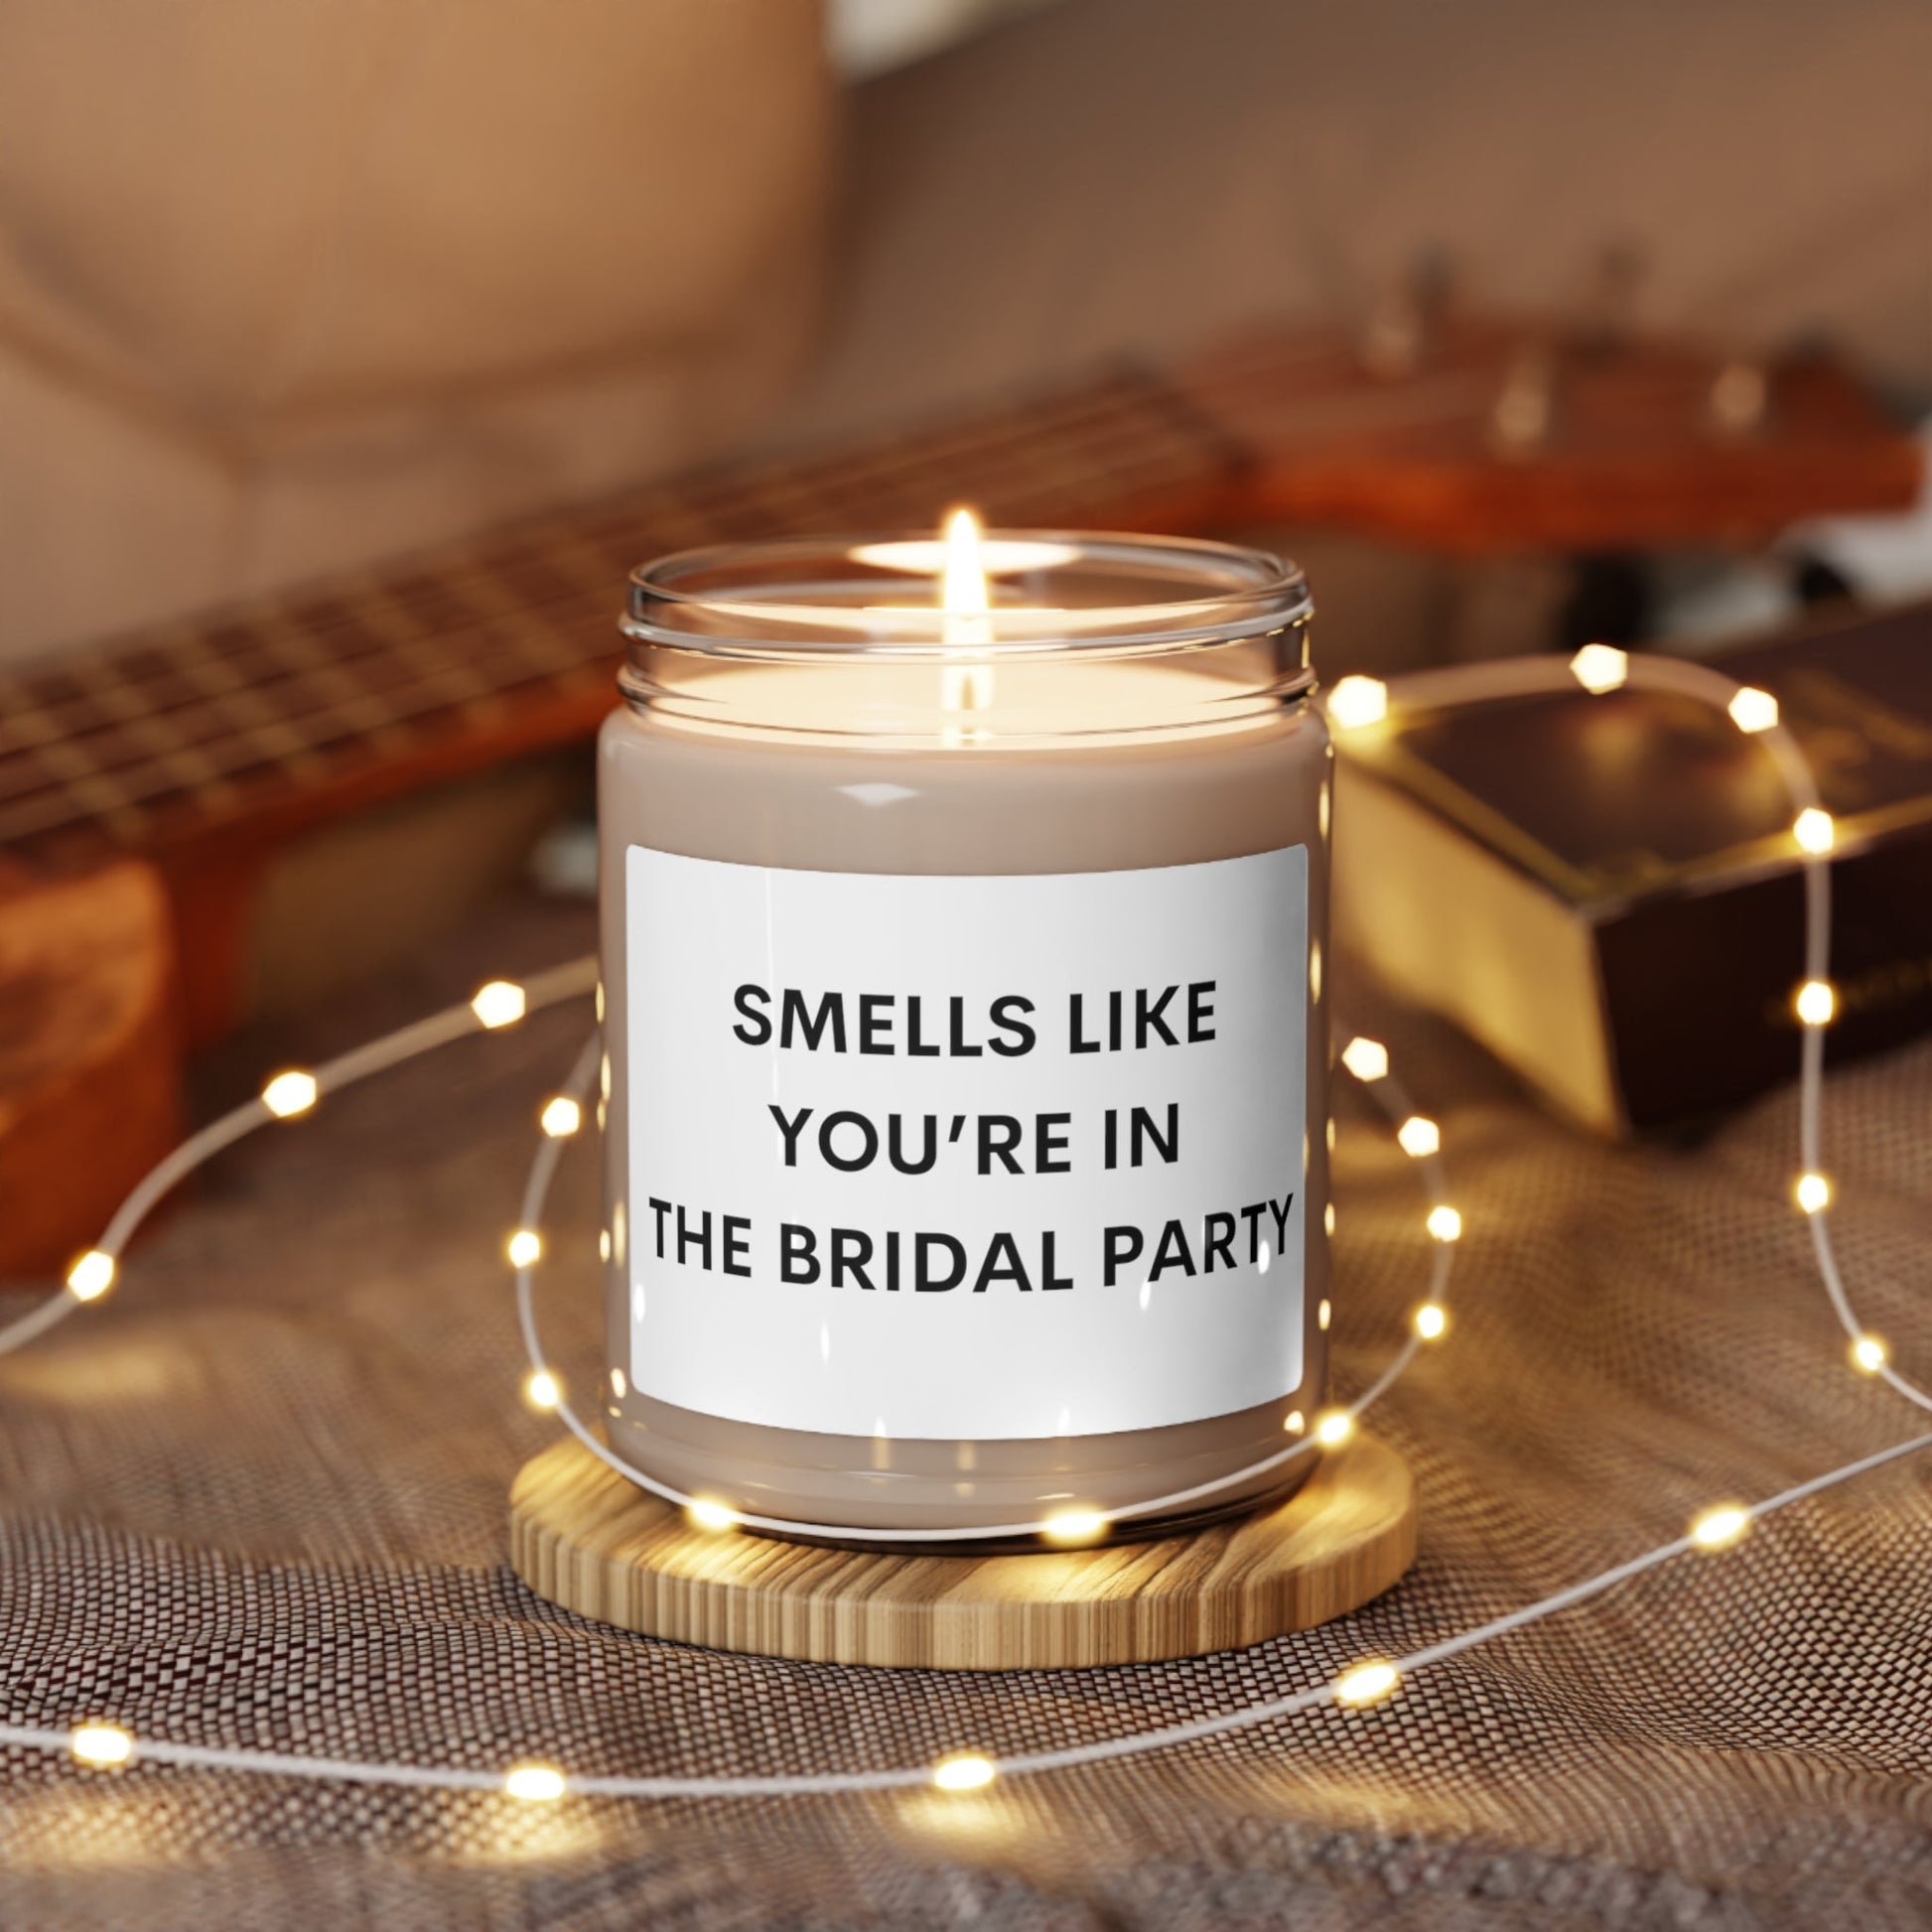 Get trendy with Smells Like You're in the Bridal Party - Home Decor available at Good Gift Company. Grab yours for $21 today!